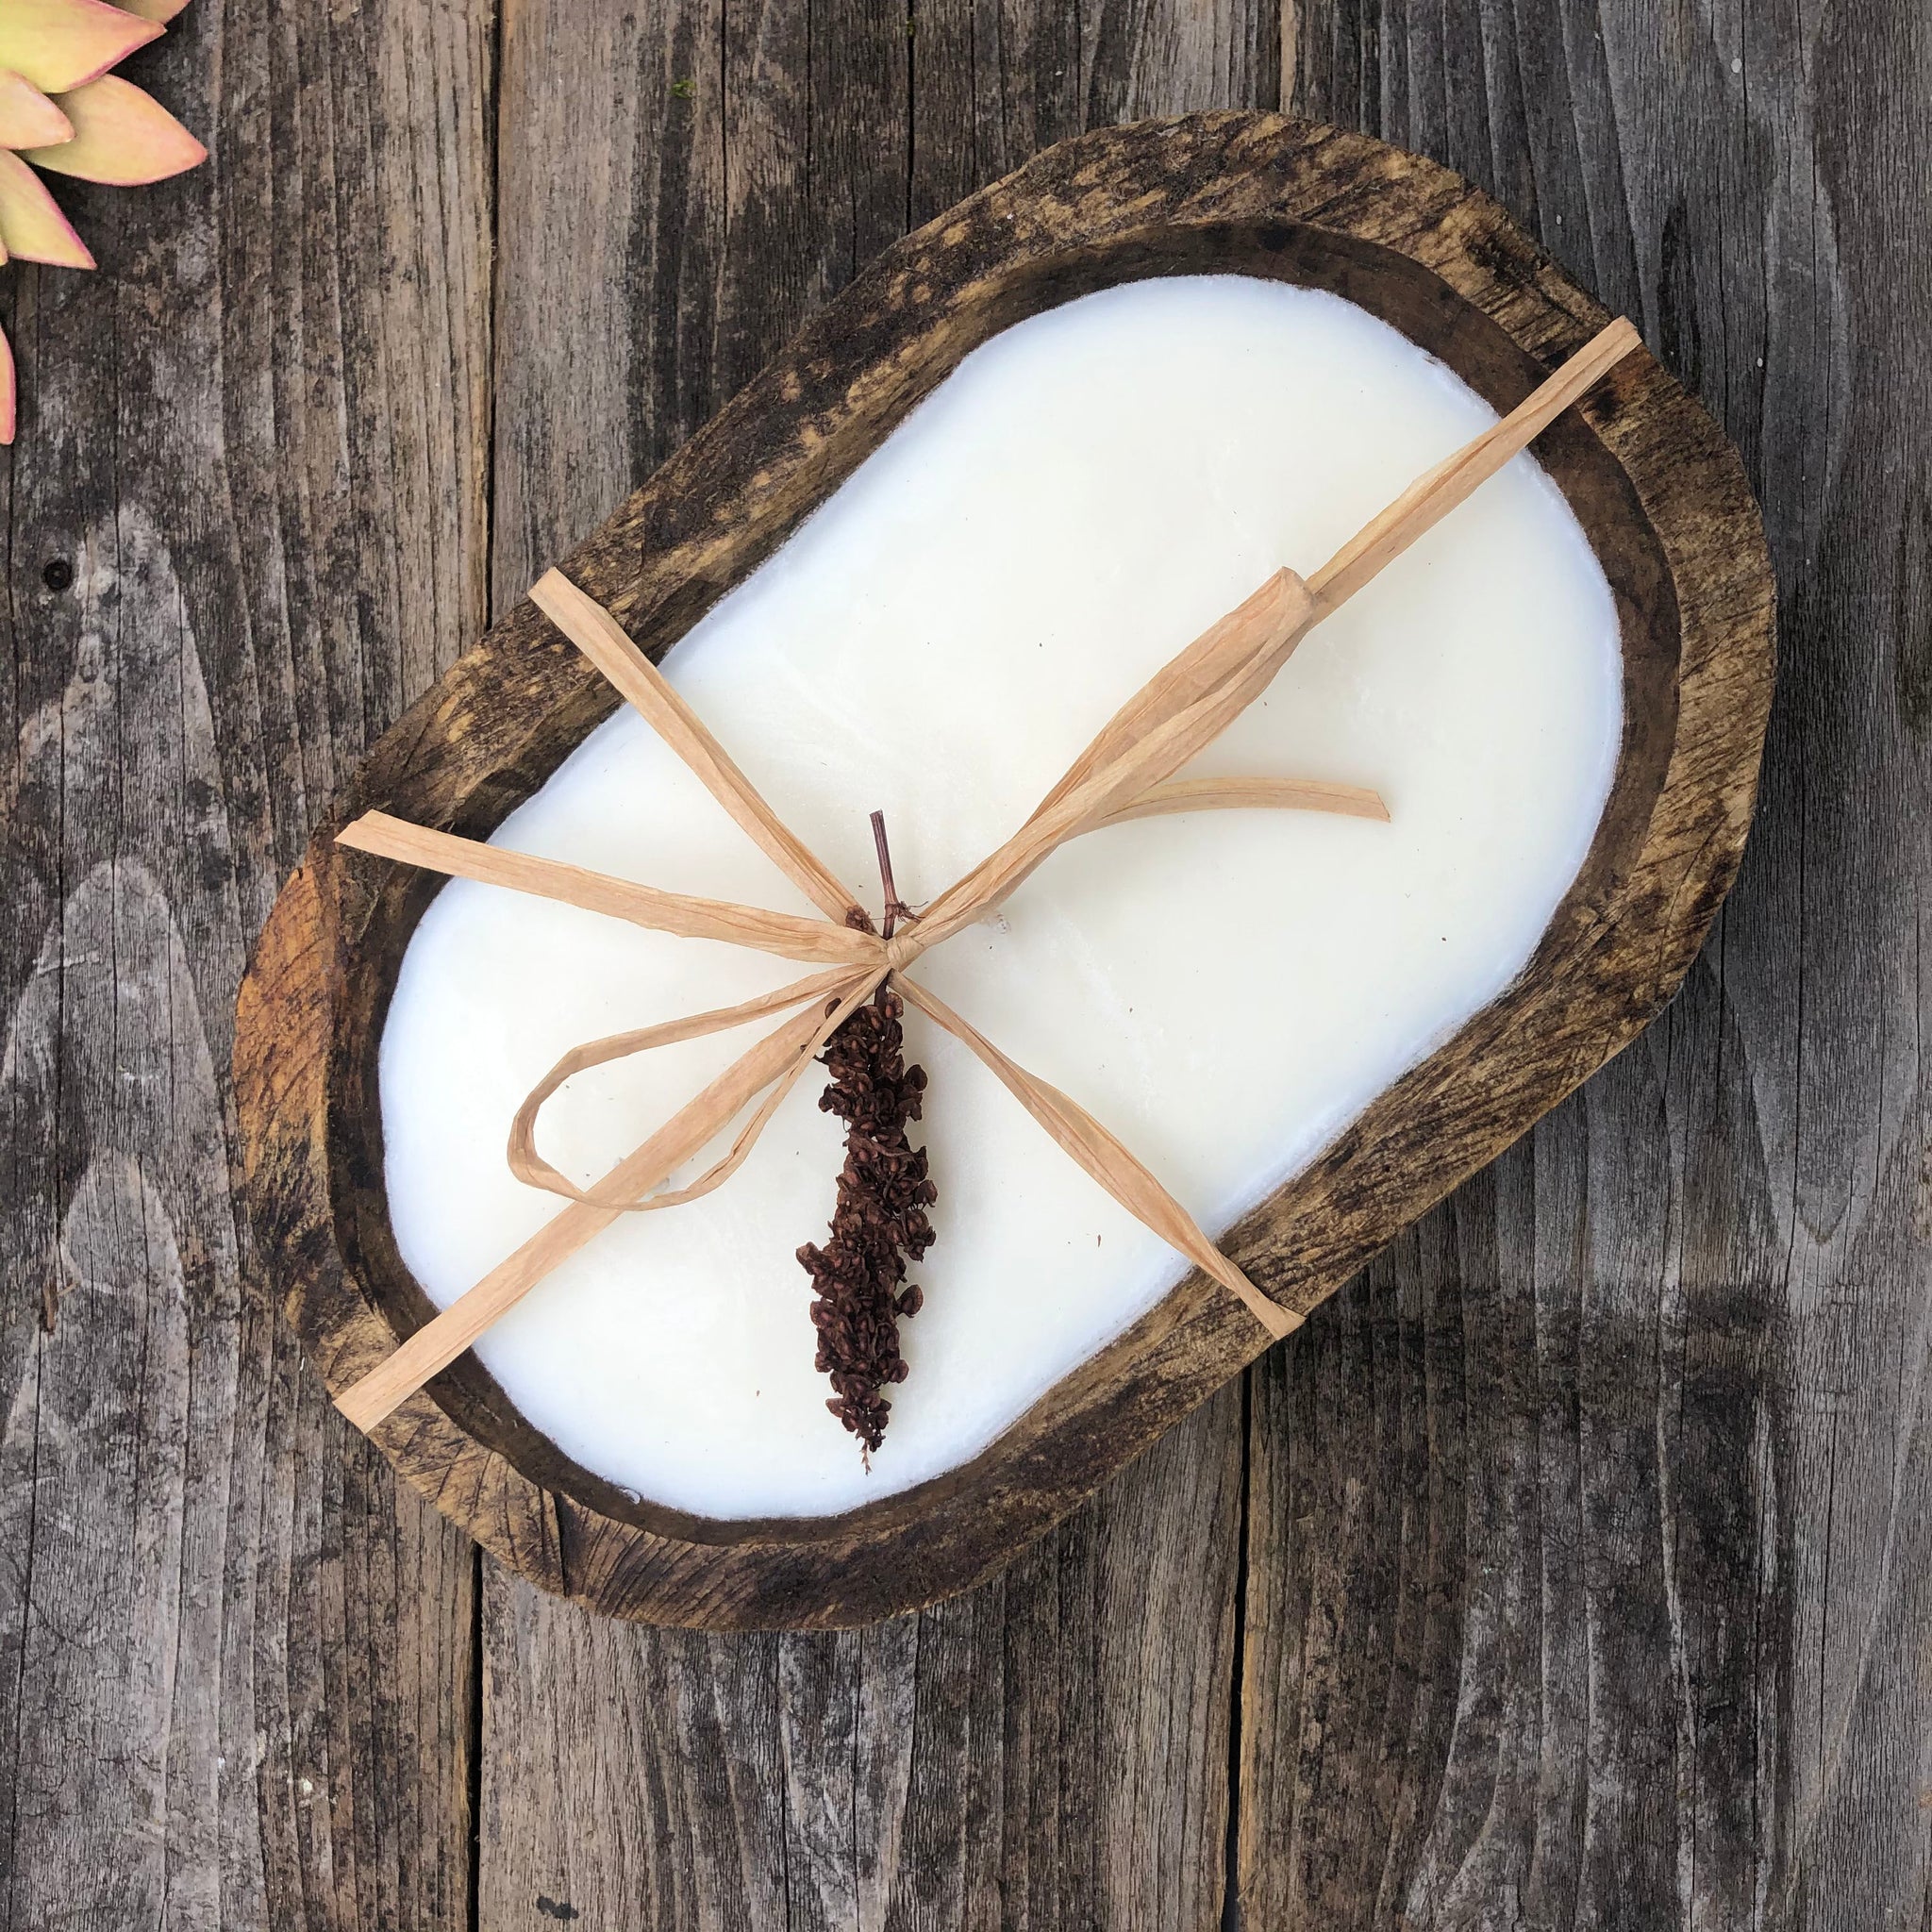 Round Wood Bowl Candle  Large Round Wooden Soy Seven  Wick Candle [CandleLRB] - $125.00 : Forever Green Art, Preserved Plants for  Home and Business